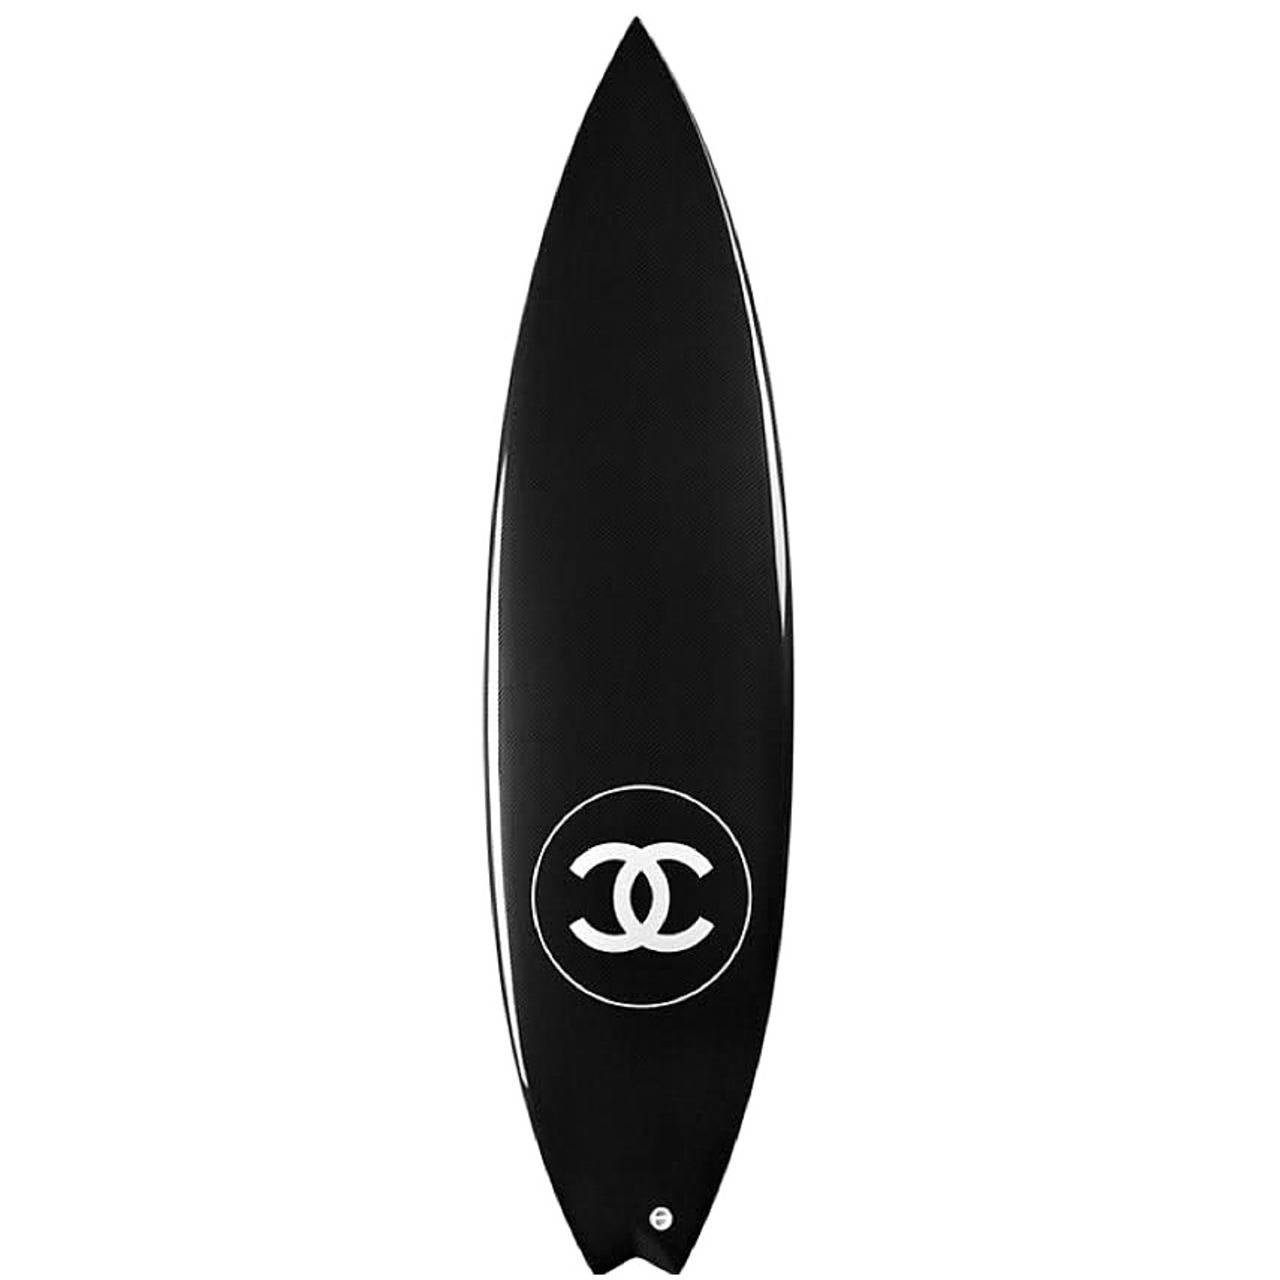 Anyone know where I can find a Chanel surfboard rep? : r/DecorReps